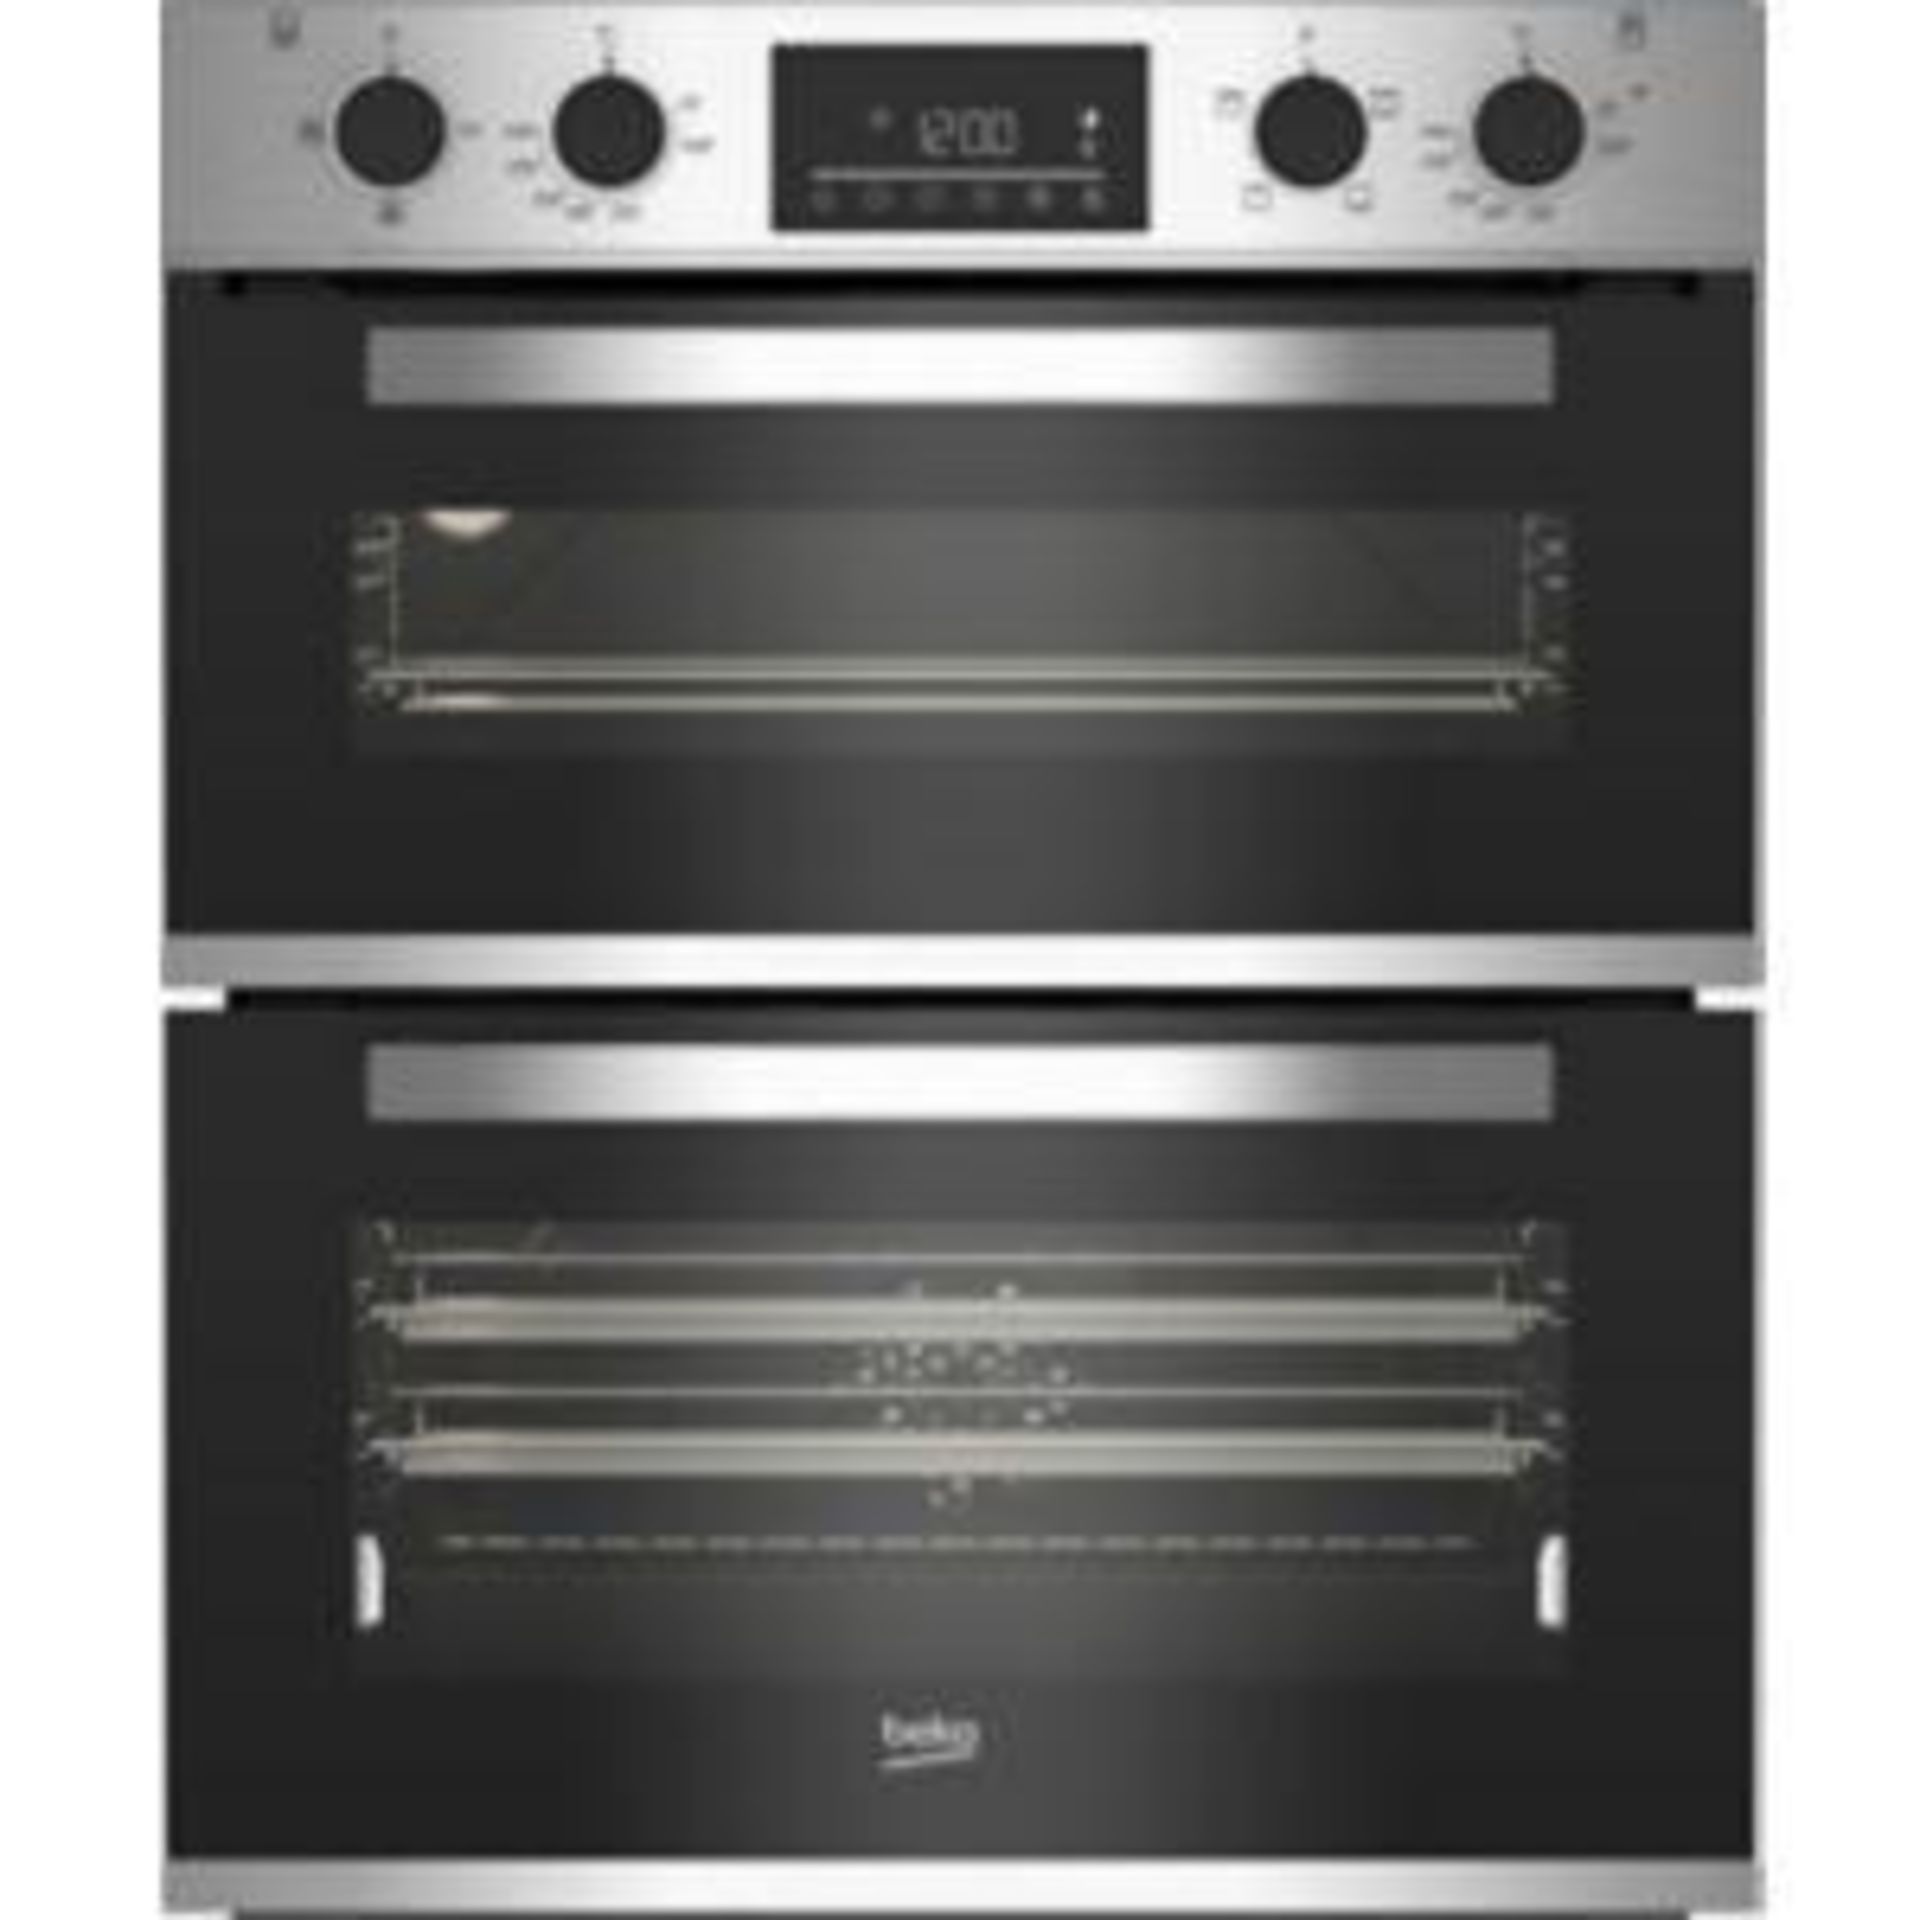 Beko Bbtqf22300X Built-in Double Oven - Stainless Steel - SR4R. This built-under double oven has a